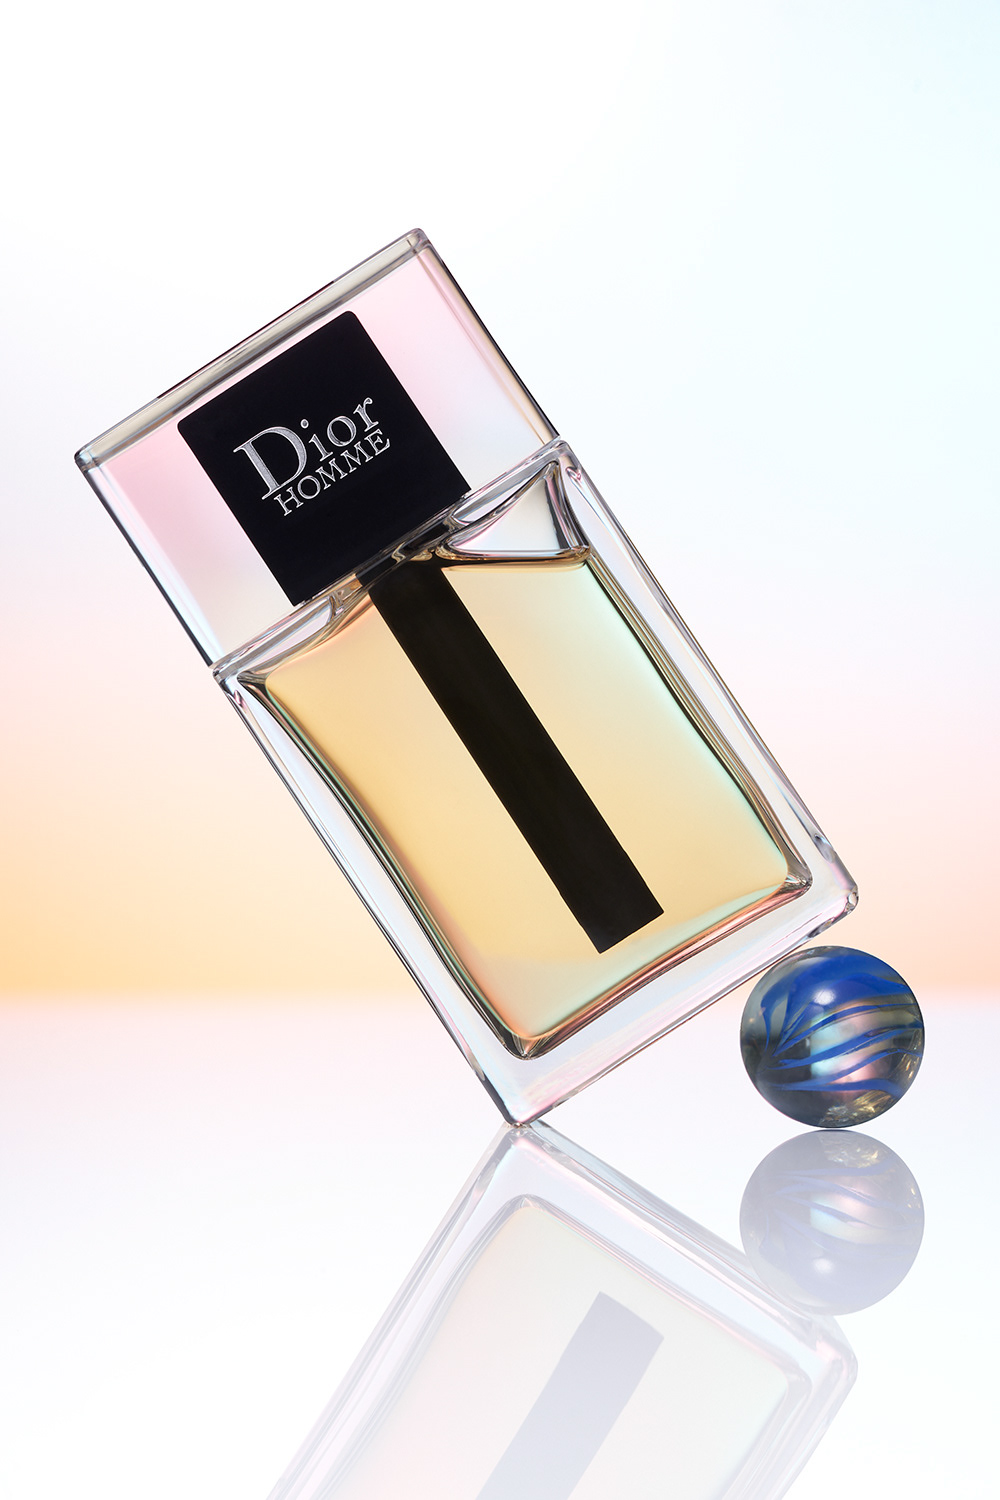 akatre Dior beauty Product Photography perfume rainbow grading luxury Packaging